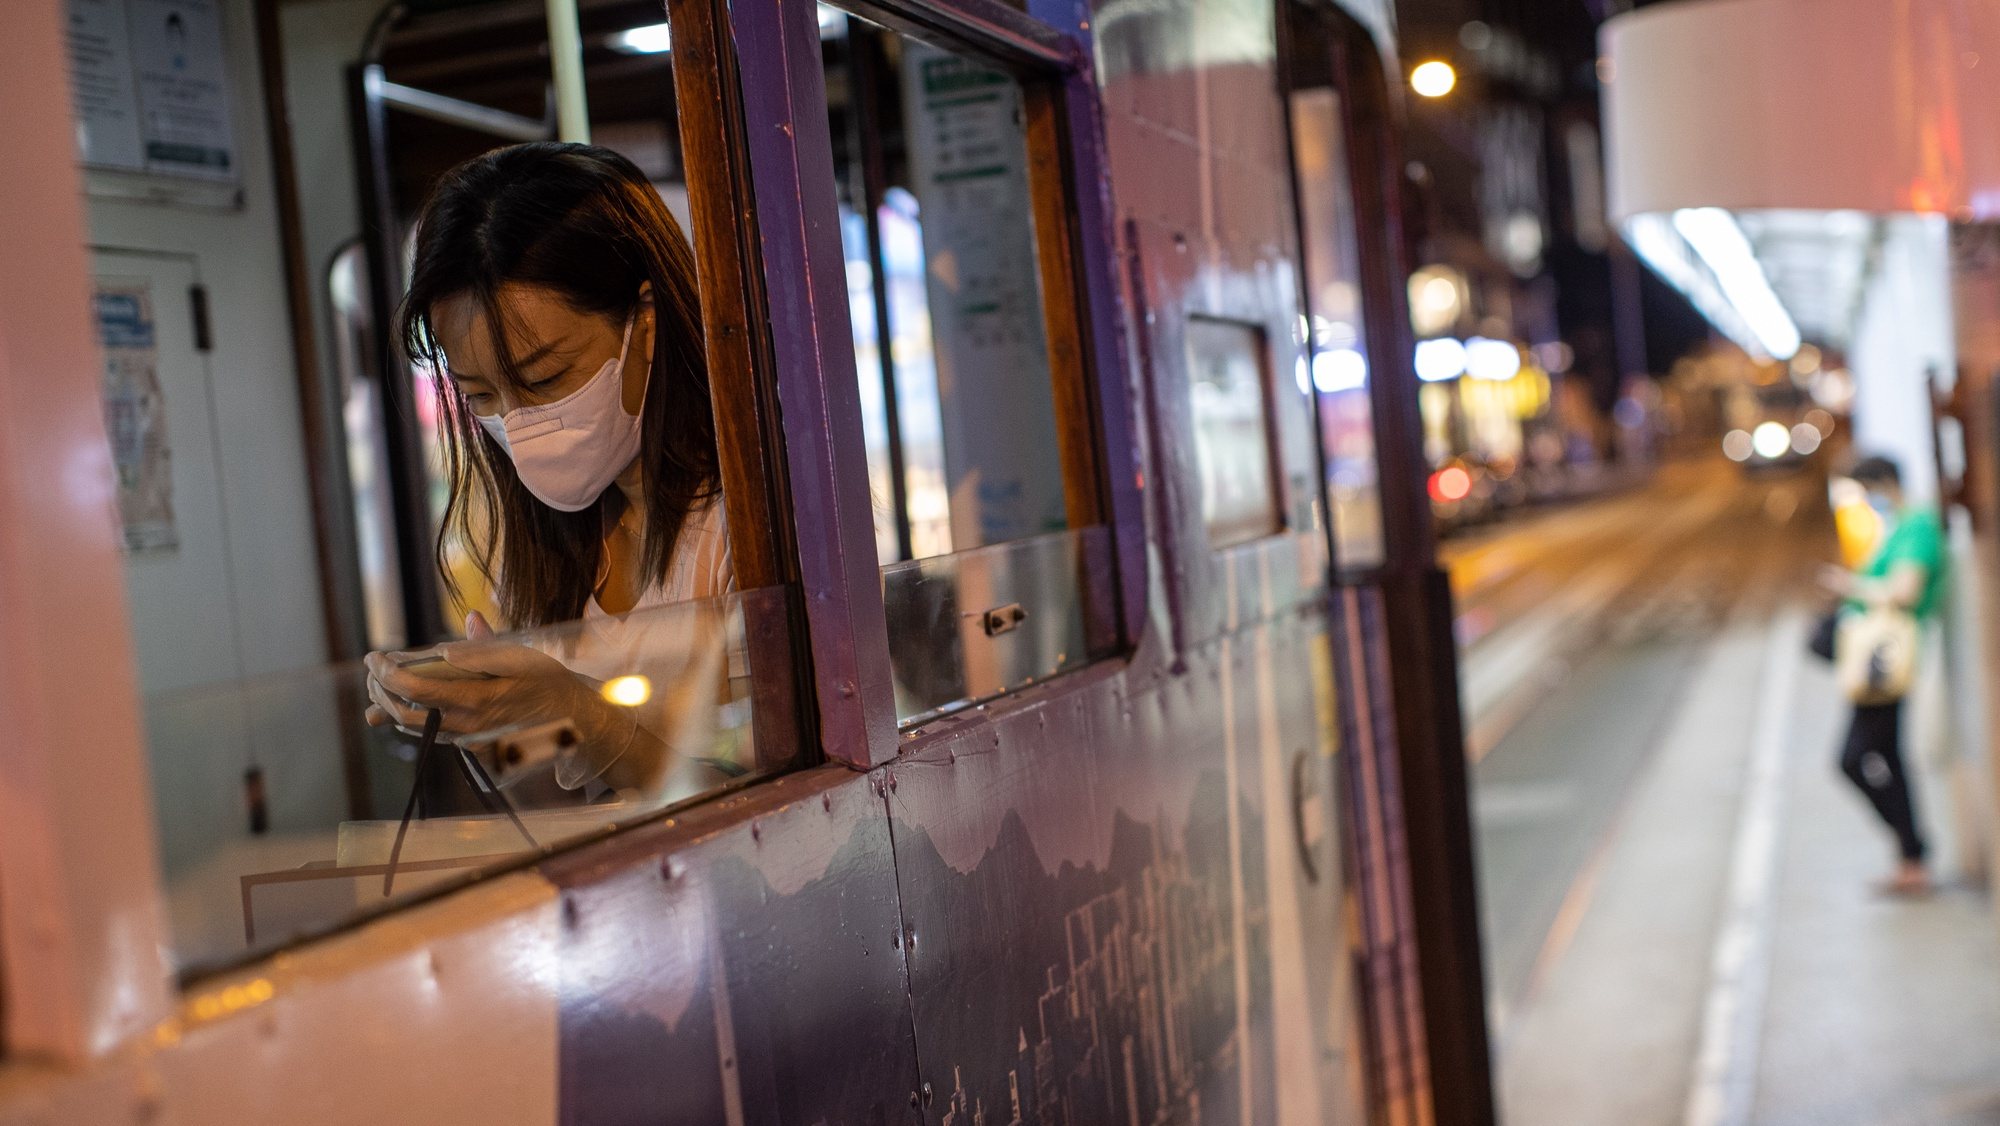 epa08570524 A woman wears a face mask and rubber gloves while riding the tram in Hong Kong, China, 28 July 2020. Hong Kong reported new coronavirus COVID-19 infections in triple digits for the seventh straight day.  EPA/JEROME FAVRE